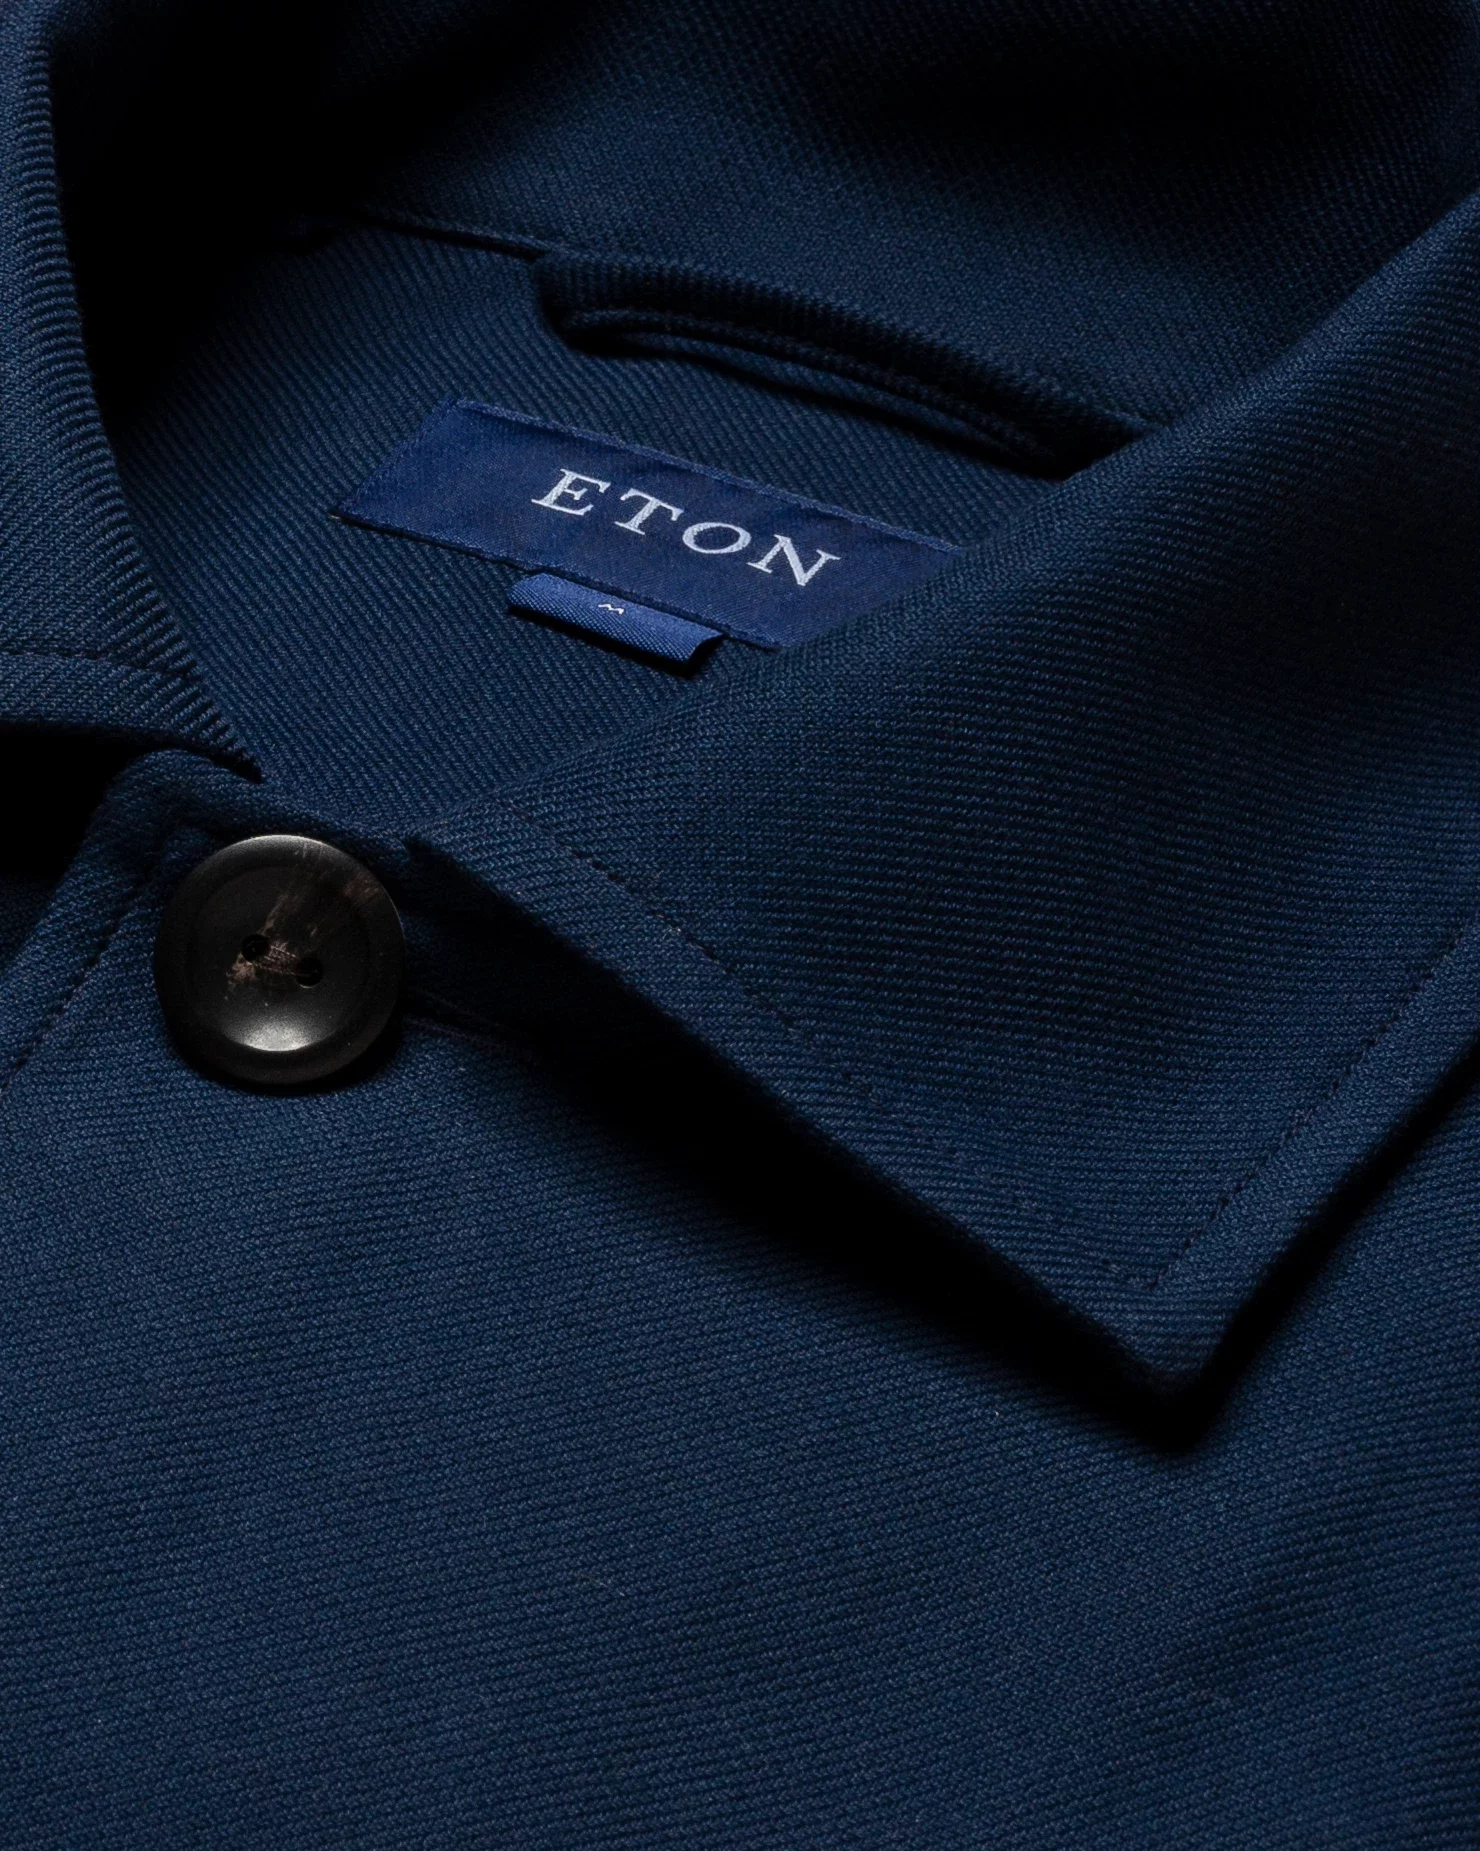 Eton - blue two face twill overshirt organic cotton collar with no collarstand double round with piping regular